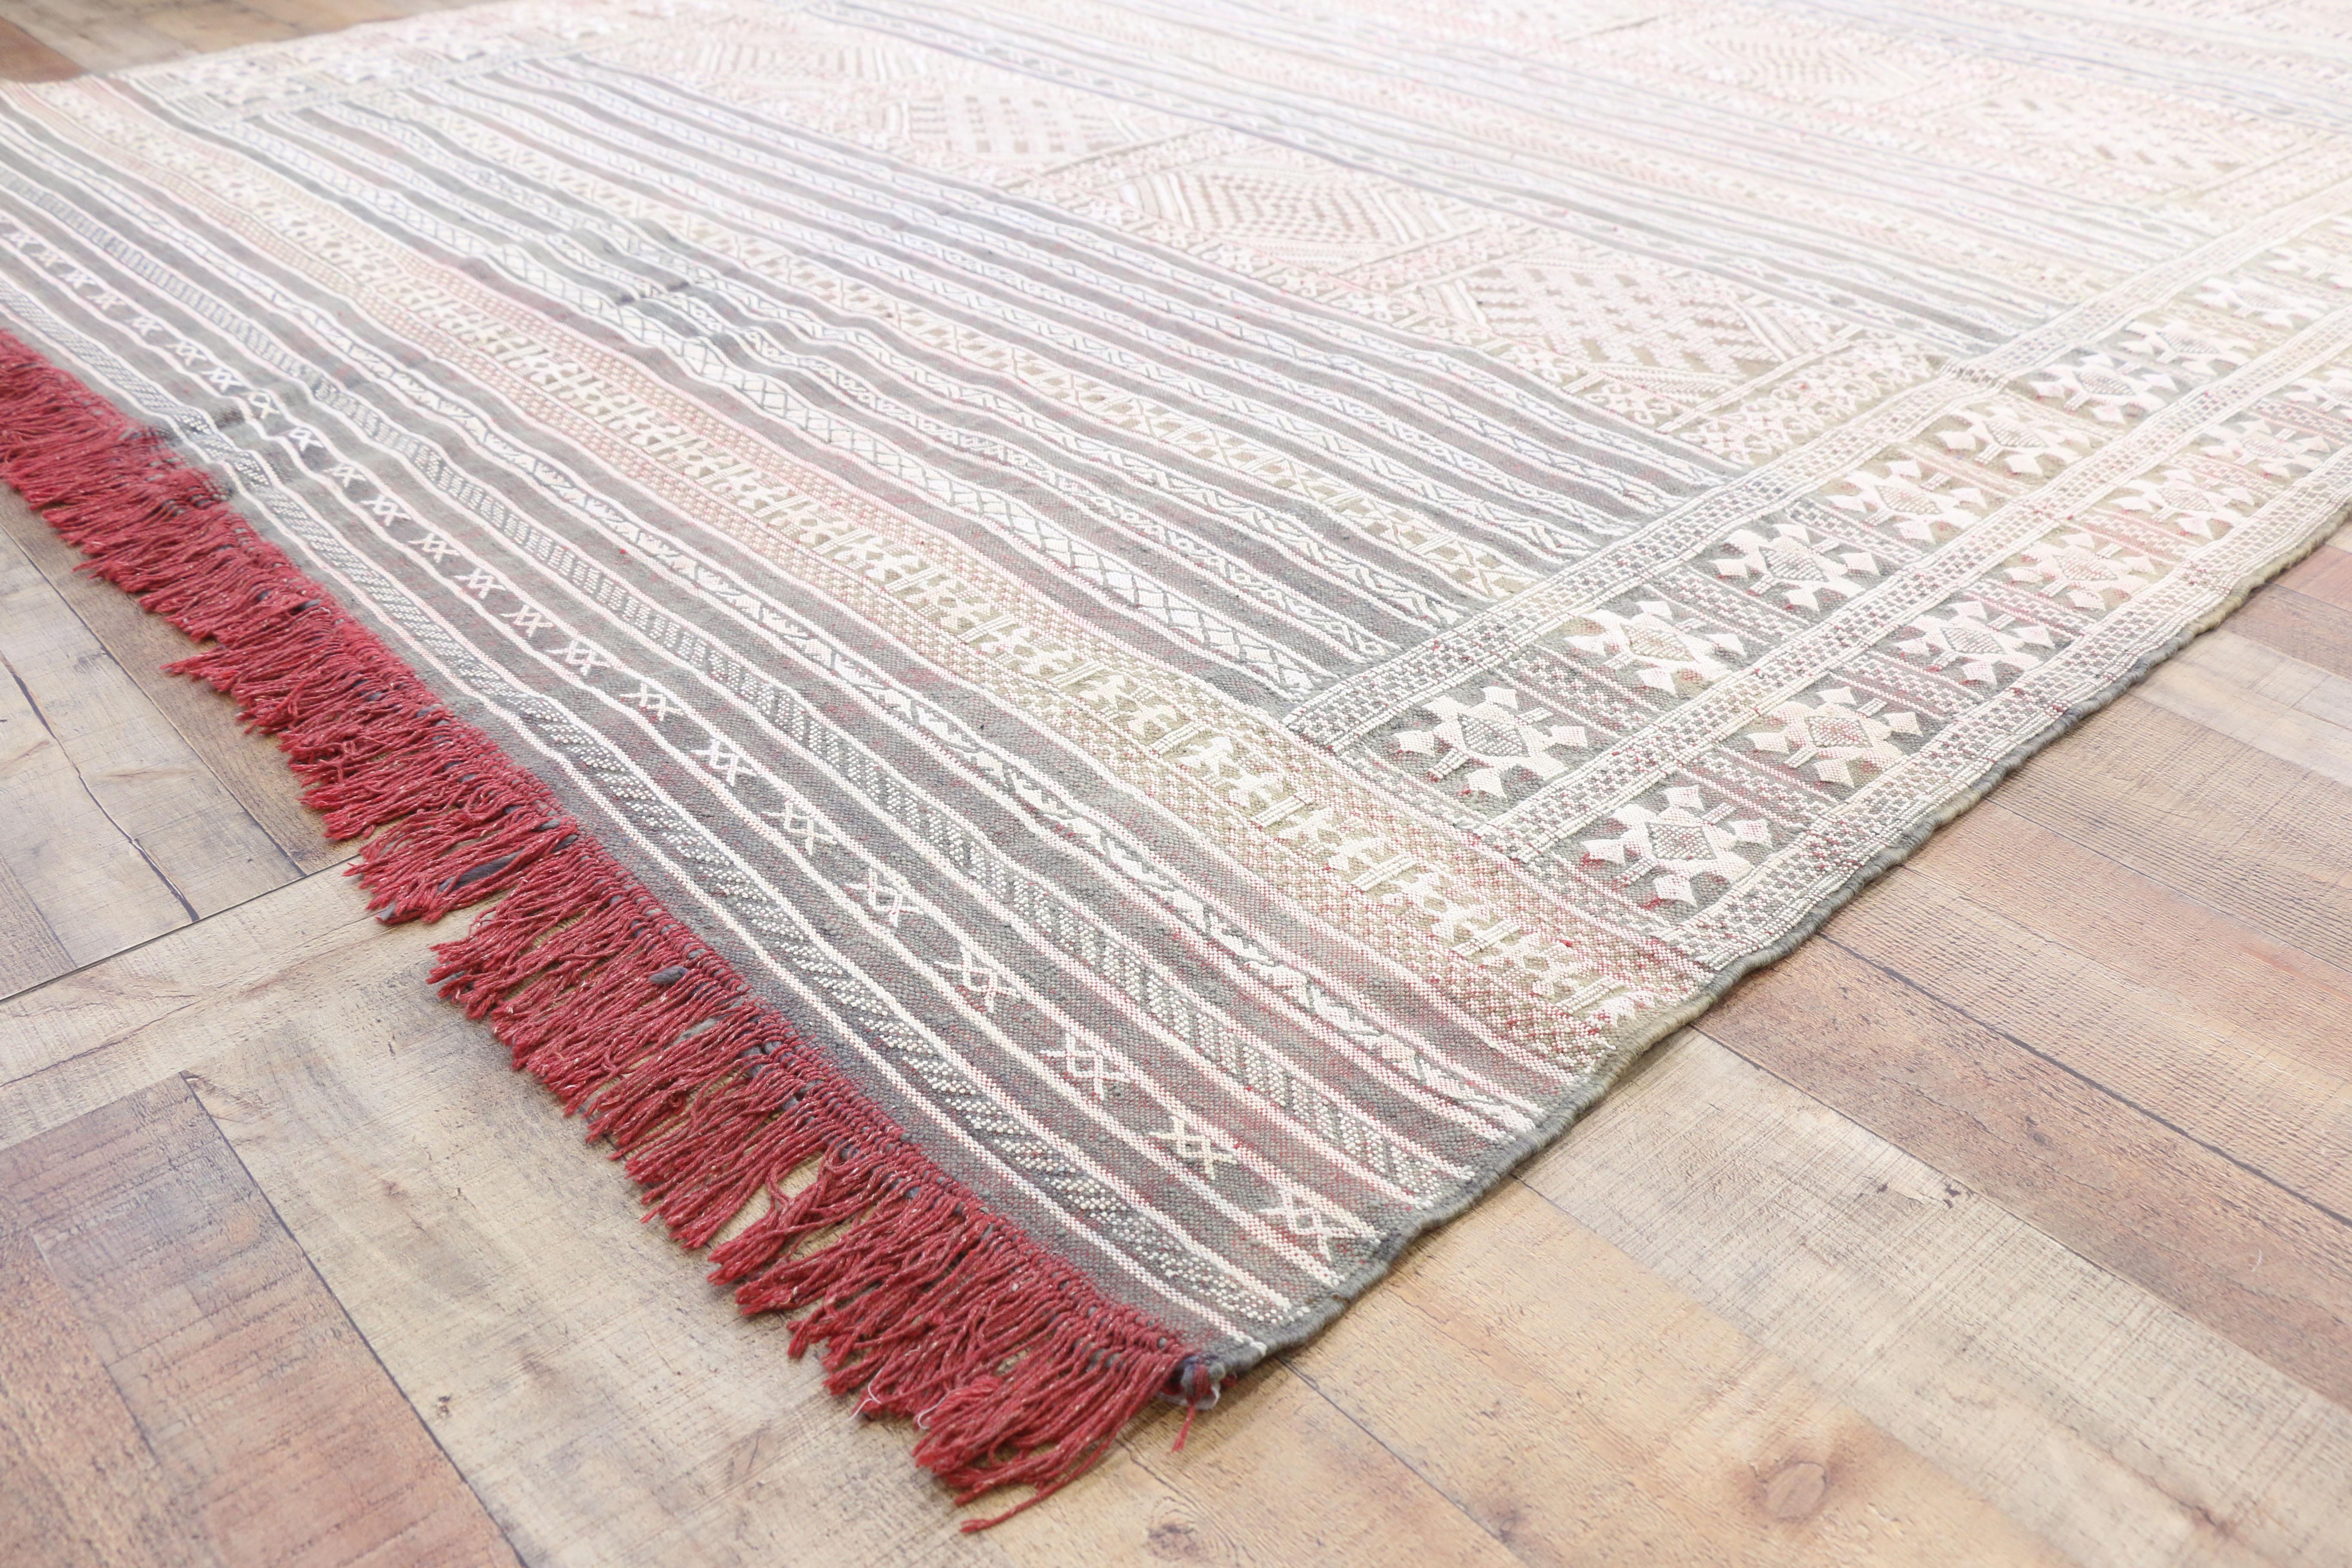 Wool Vintage Moroccan Zemmour Berber Kilim Area Rug with Bohemian Tribal Style